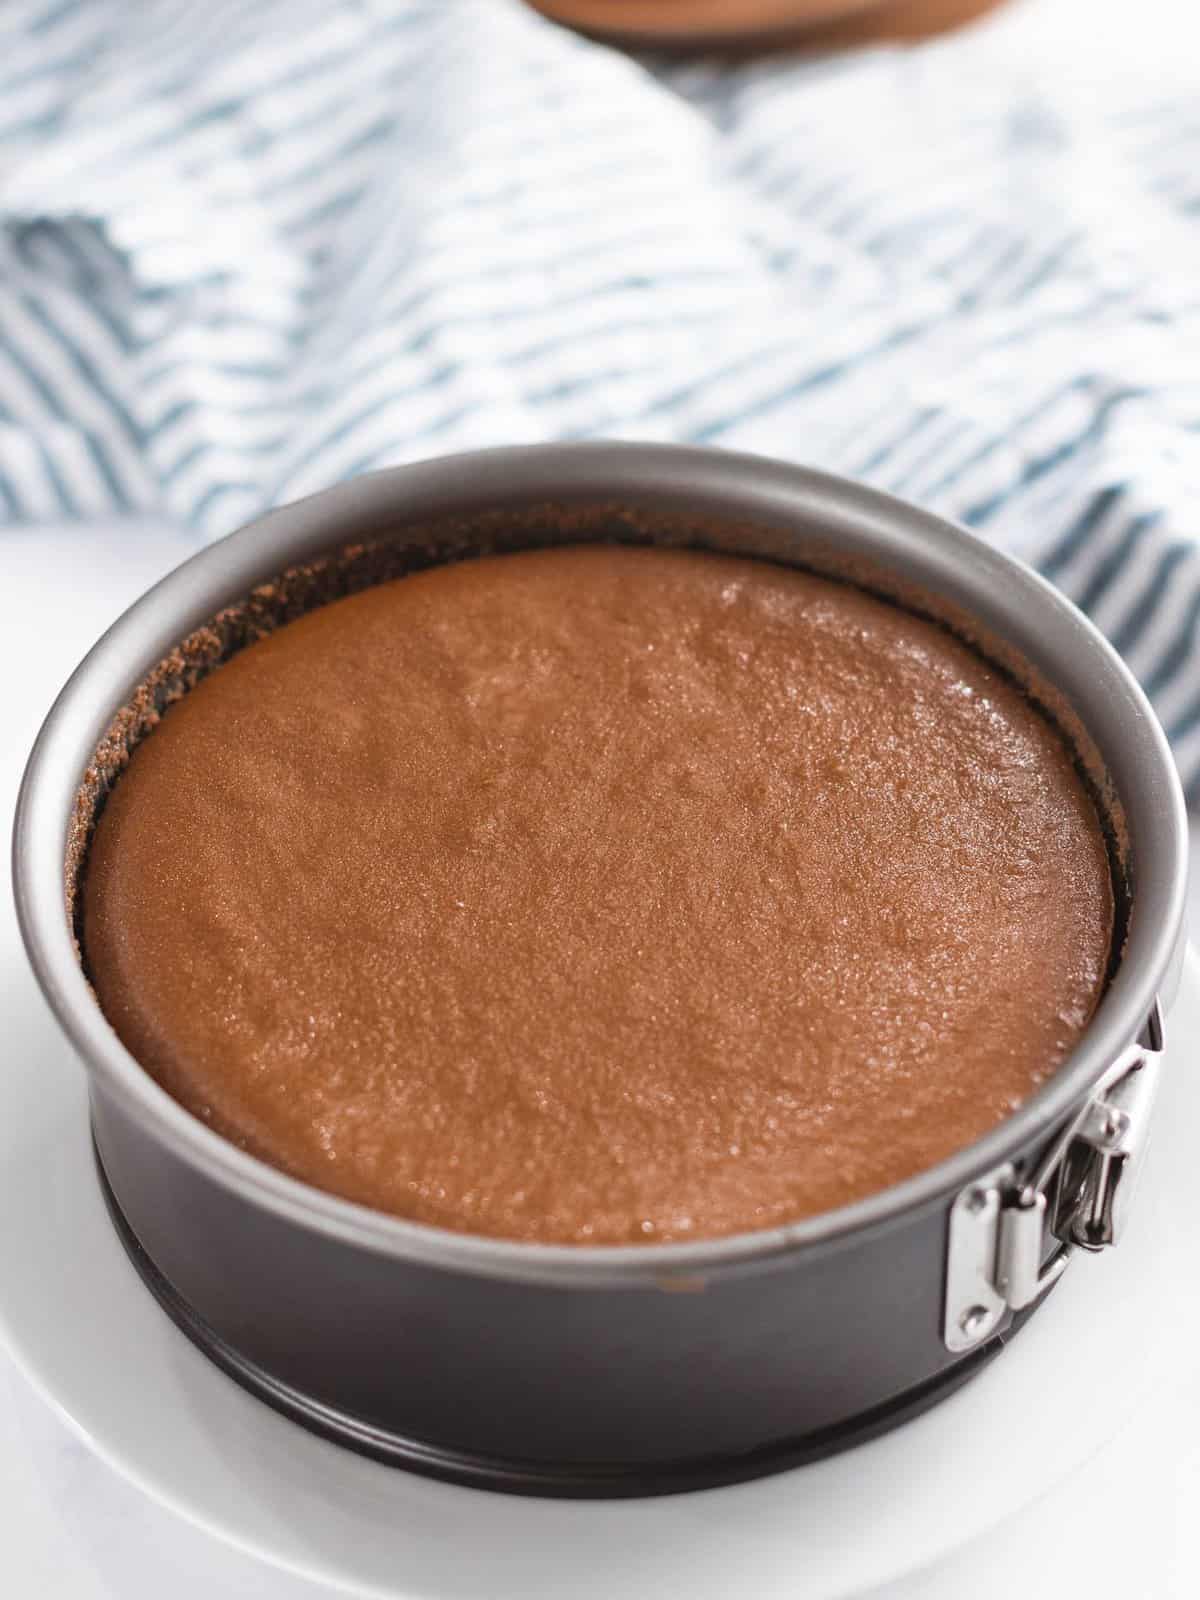 Chocolate cheesecake baked in a springform pan.